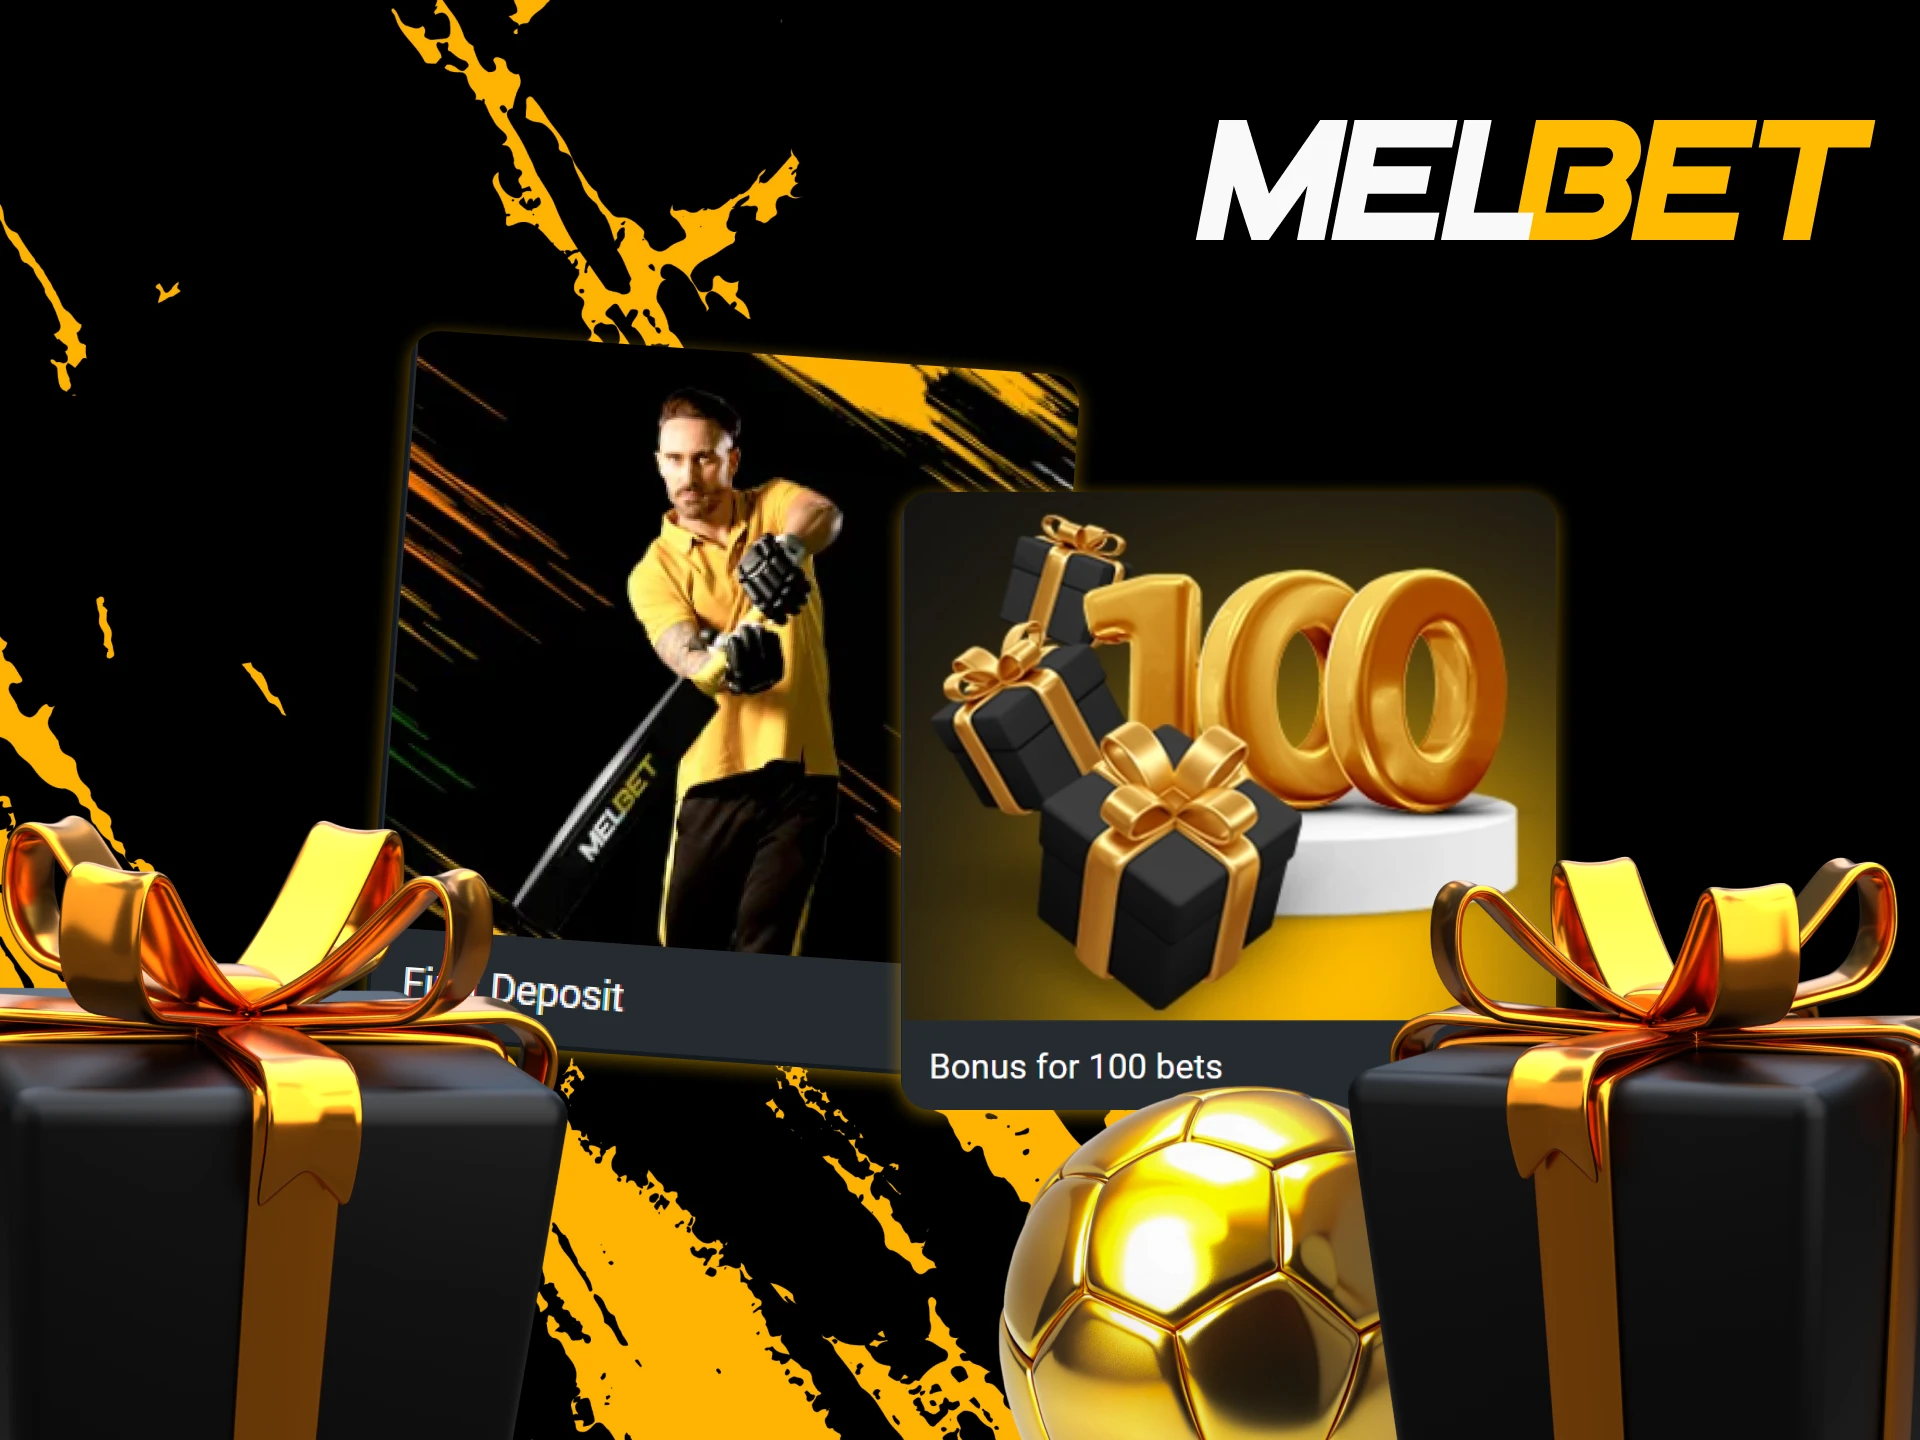 At Melbet you can choose the bonus you like for betting on football.